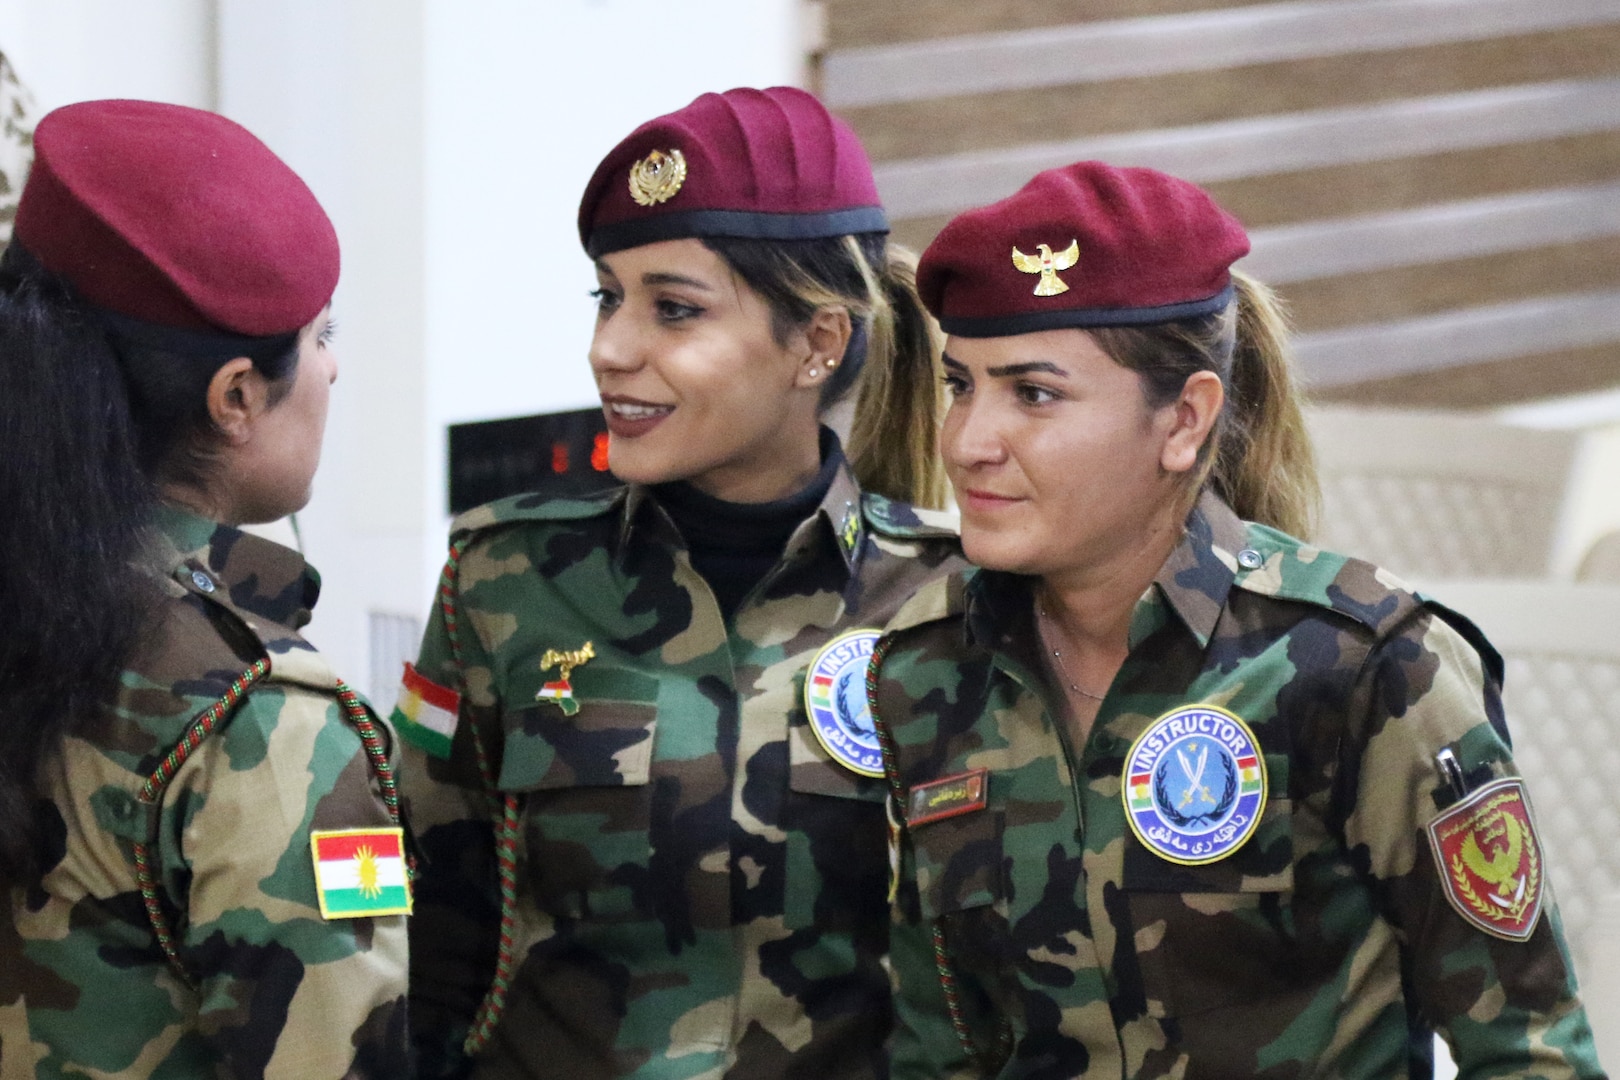 Female Peshmerga soldiers earned their Advanced Instructor title at Coalition Joint Task Force training centers in Sulaymaniyah and Erbil, Iraq, Nov. 27-28, 2019. They can now teach their fellow soldiers various skills and classes, including weapons, basic first aid, the law of armed conflict and preventing gender-based violence. The Coalition remains united and determined in its mission to degrade and defeat Daesh and continues to work with allies and partners to implement stabilization efforts. (U.S. Army photo by Sgt. 1st Class Gary A. Witte)